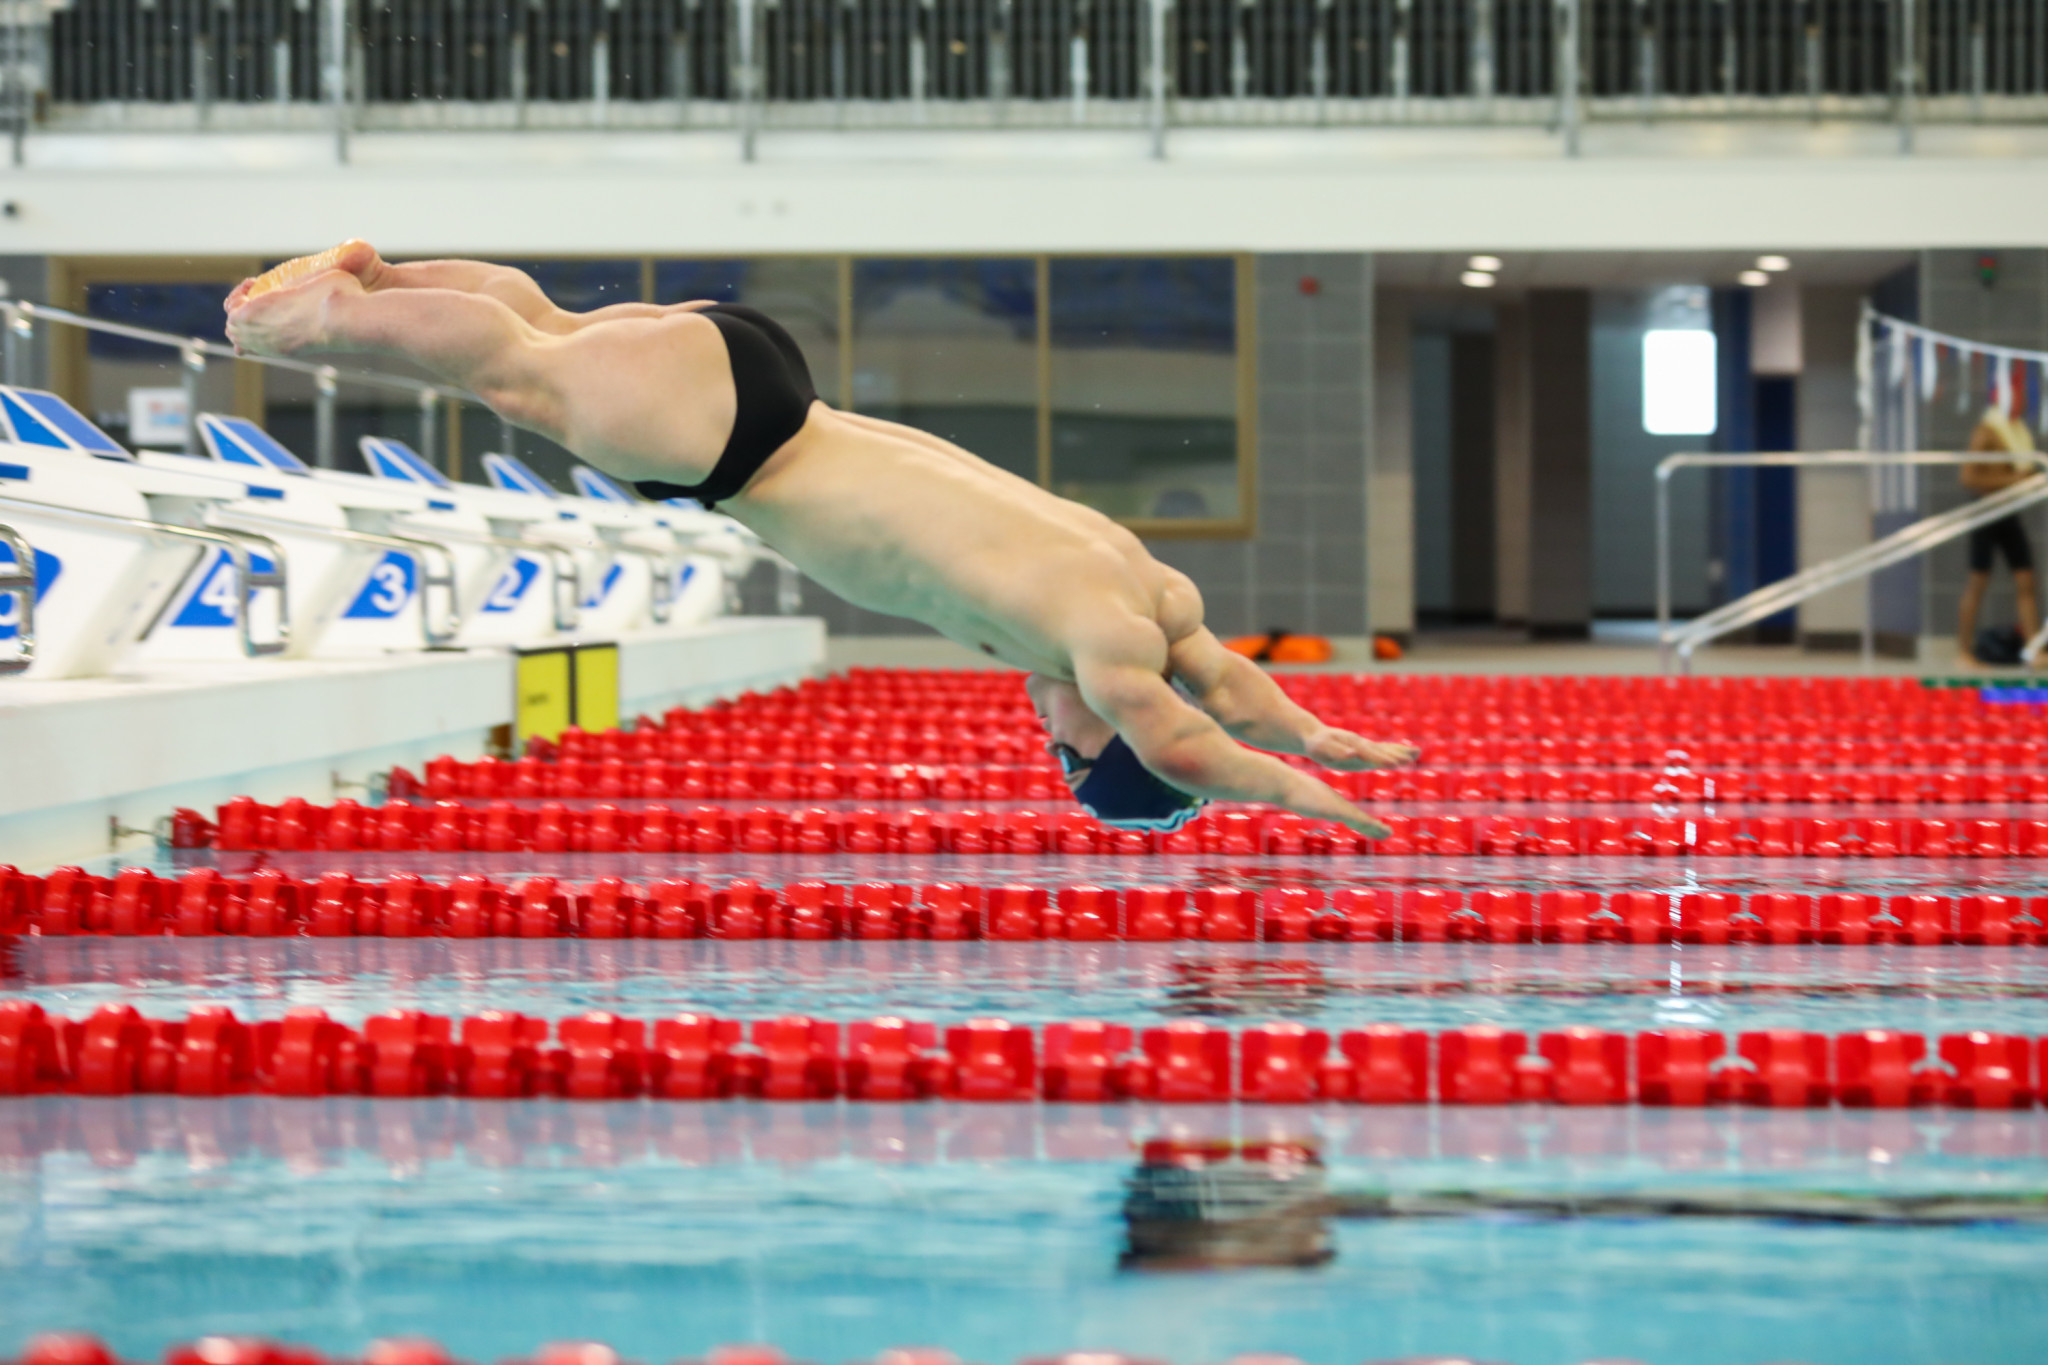 The warm-up and competition pools contain 1.2 million gallons of water ©Birmingham 2022